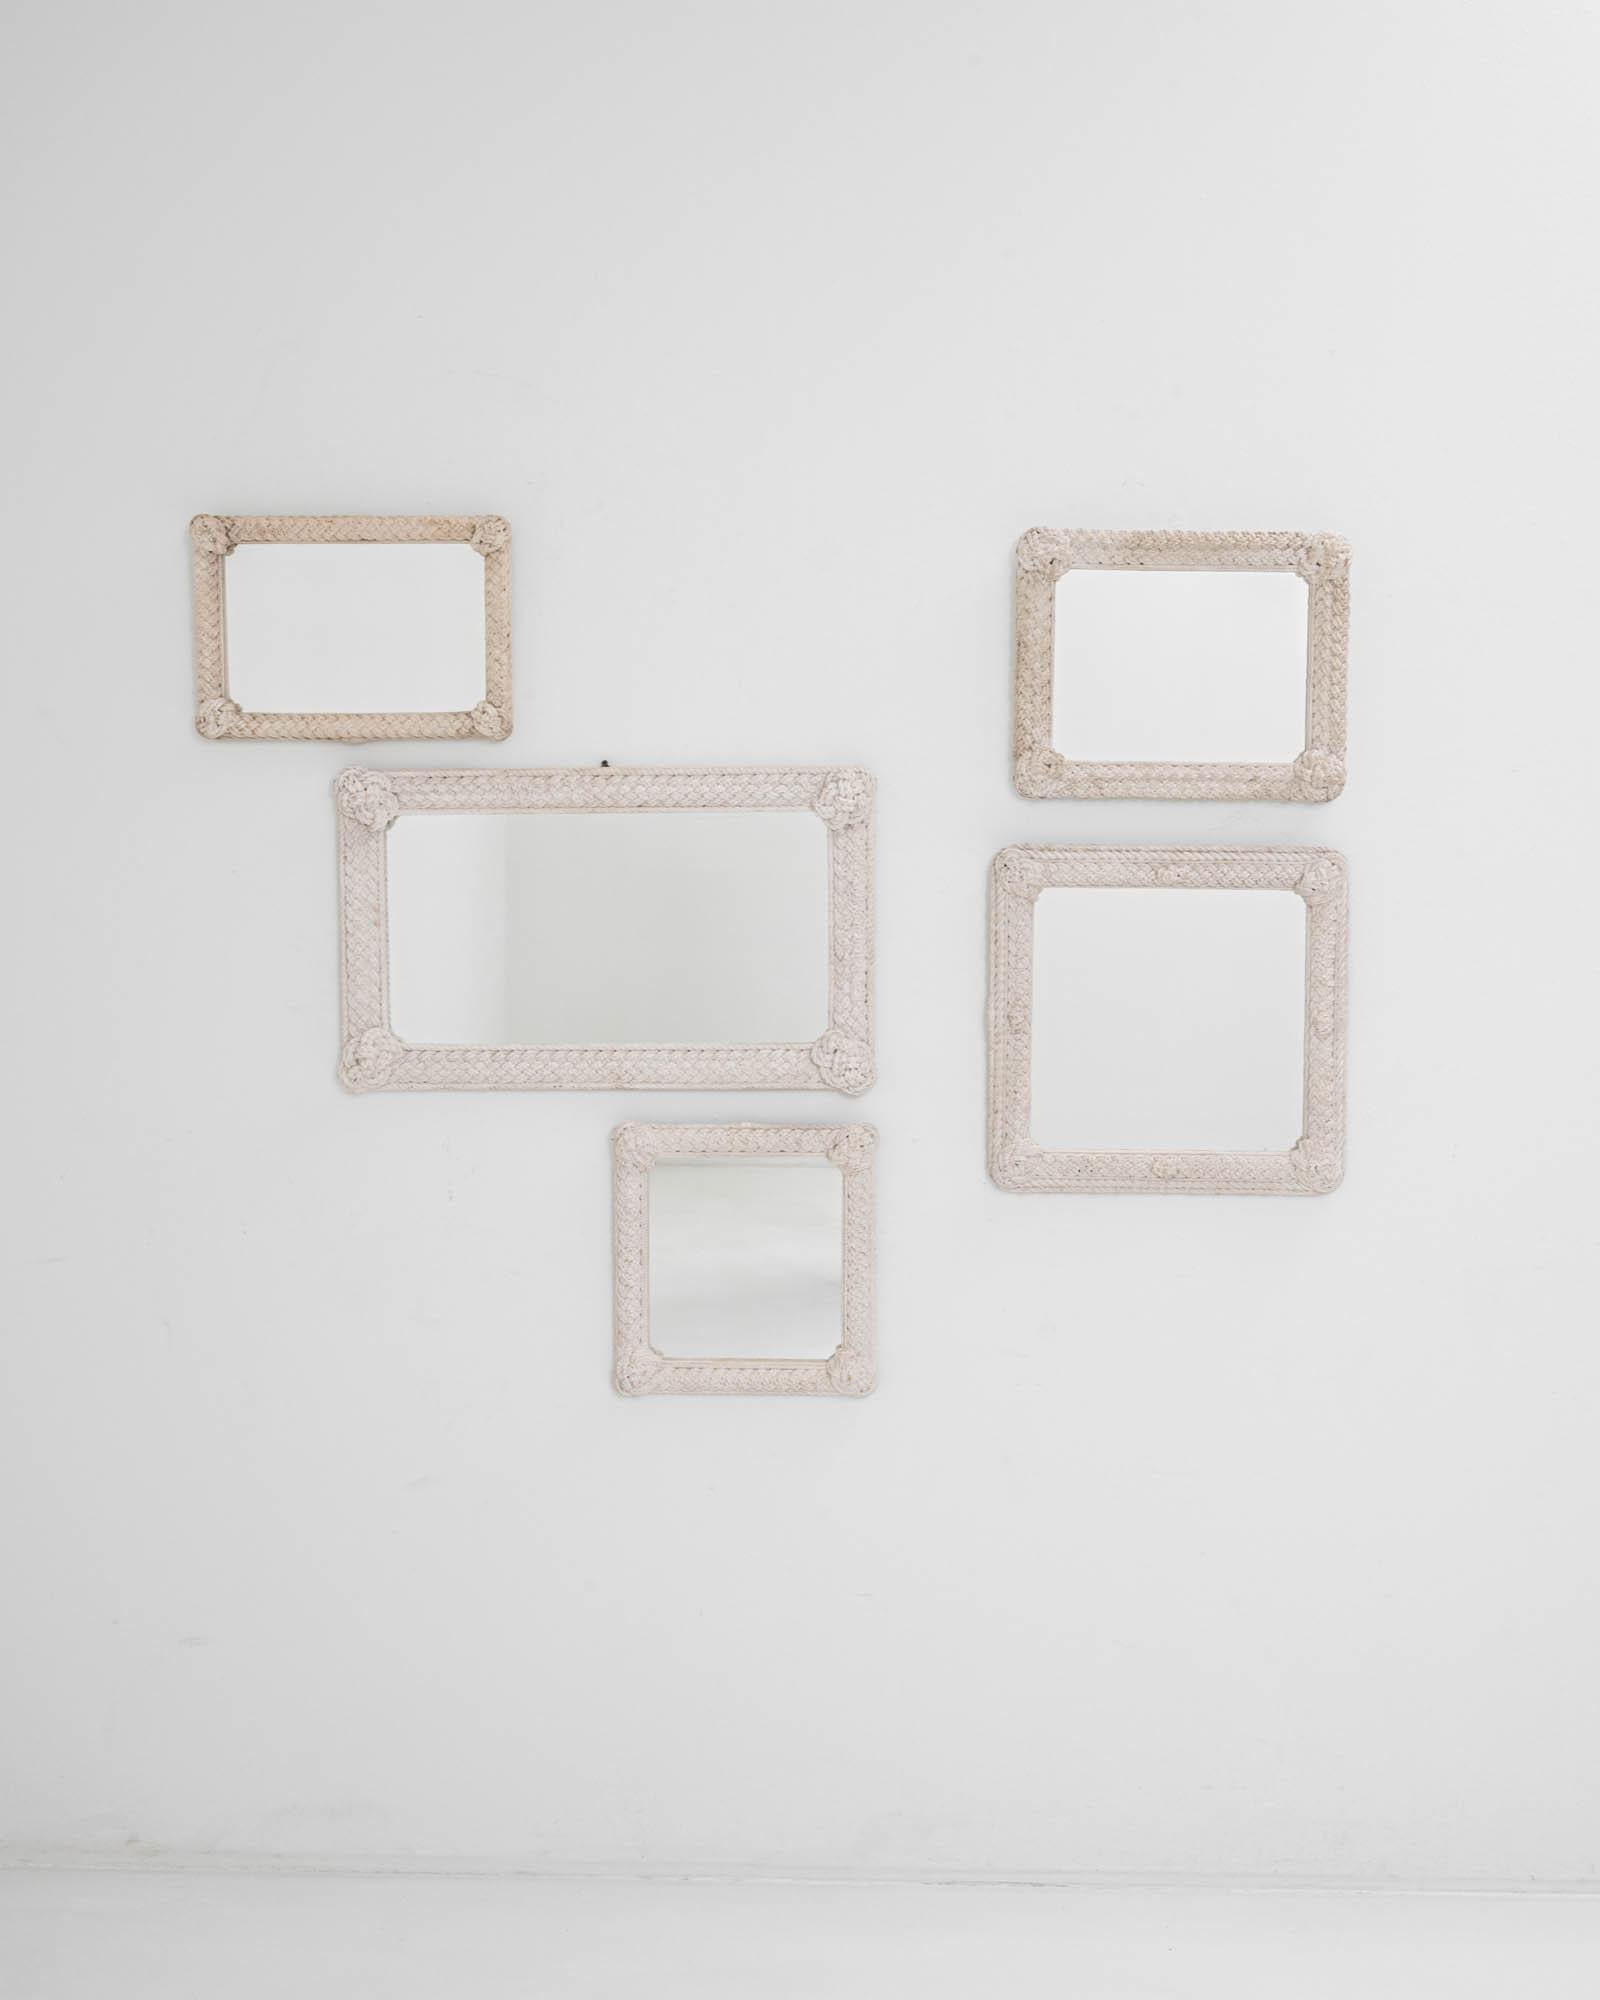 Rustic and whimsical, woven macrame frames give this set of five vintage mirrors a hand-crafted charm. Made in France in the 20th century, the lively variety of braiding techniques represents the ancient craft of rope work, the time-worn white